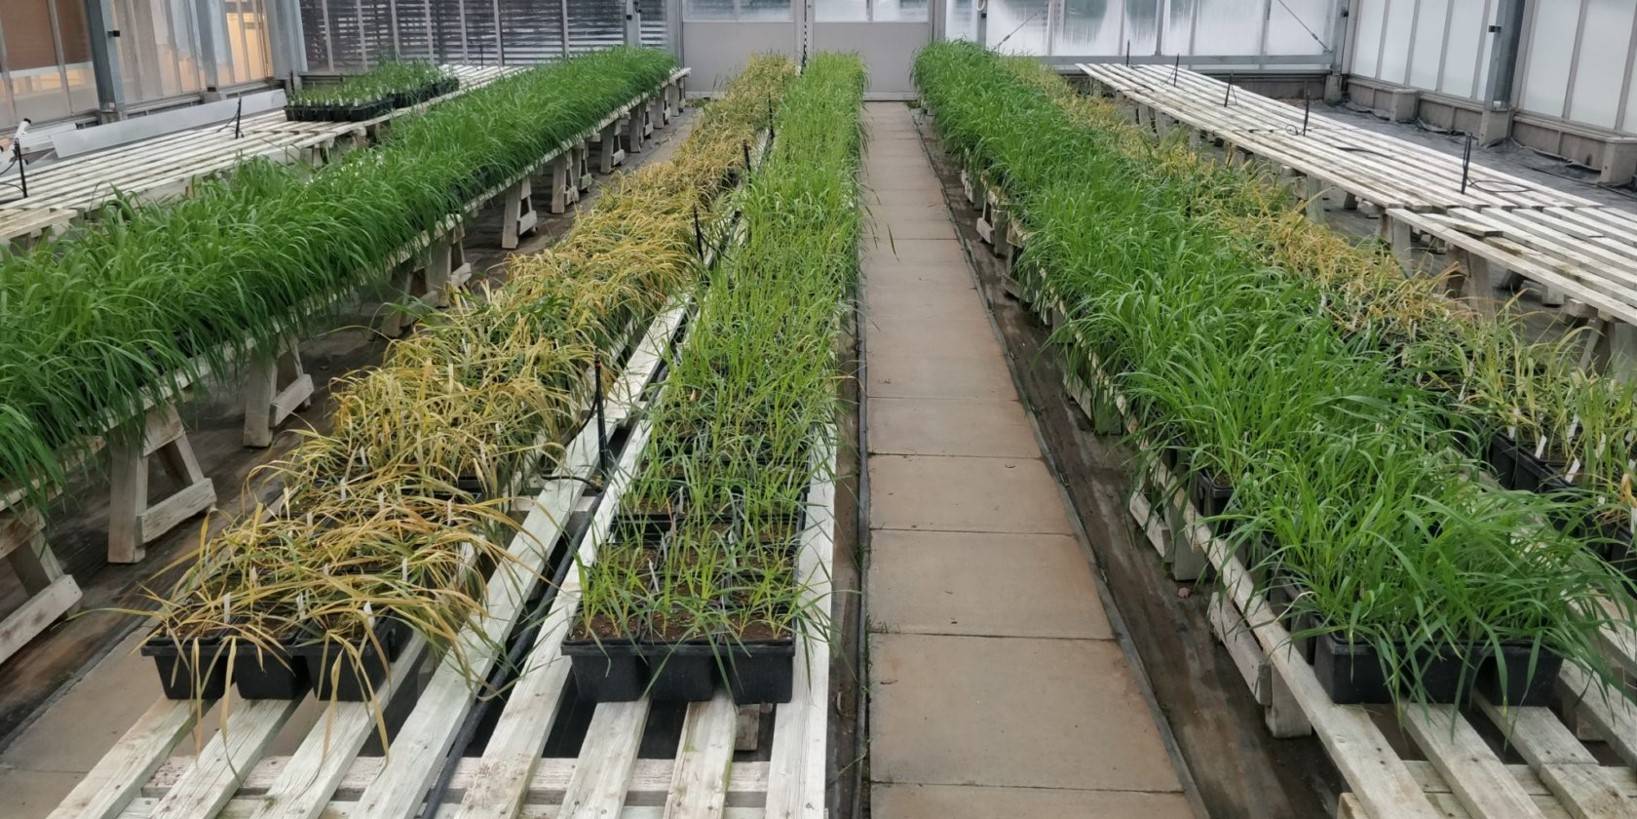 Wild oats growing in NIAB Glasshouses